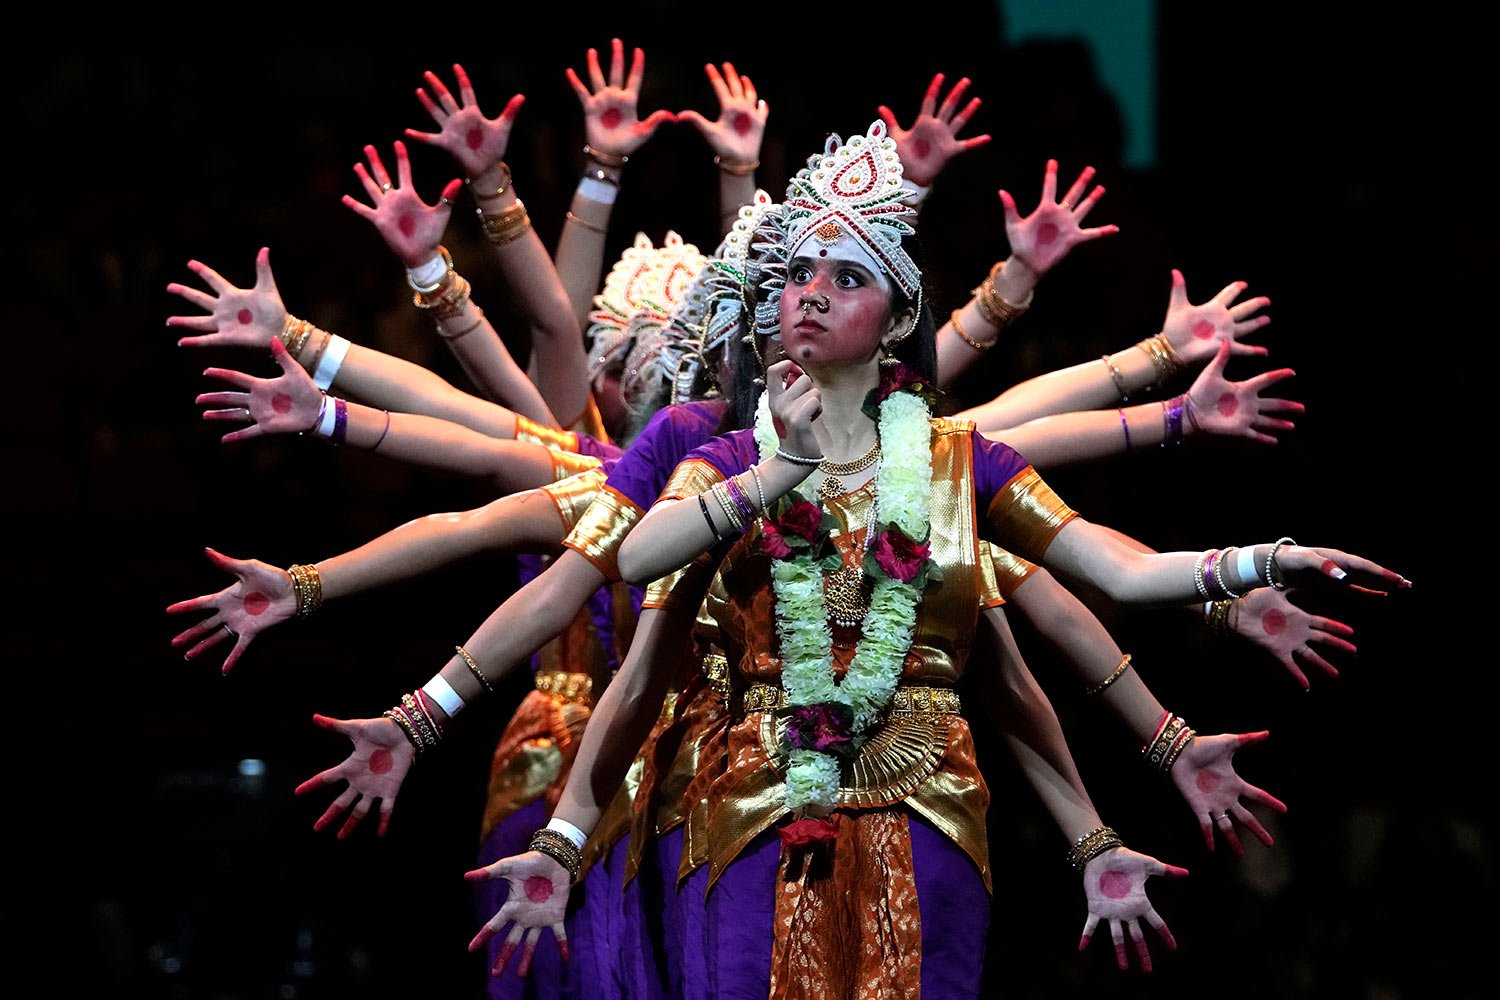  Dancers perform ahead of Indian Prime Minister Narendra Modi's arrival to attend an Indian community event at Qudos Bank Arena in Sydney, Australia, Tuesday, May 23, 2023.  (AP Photo/Mark Baker) 